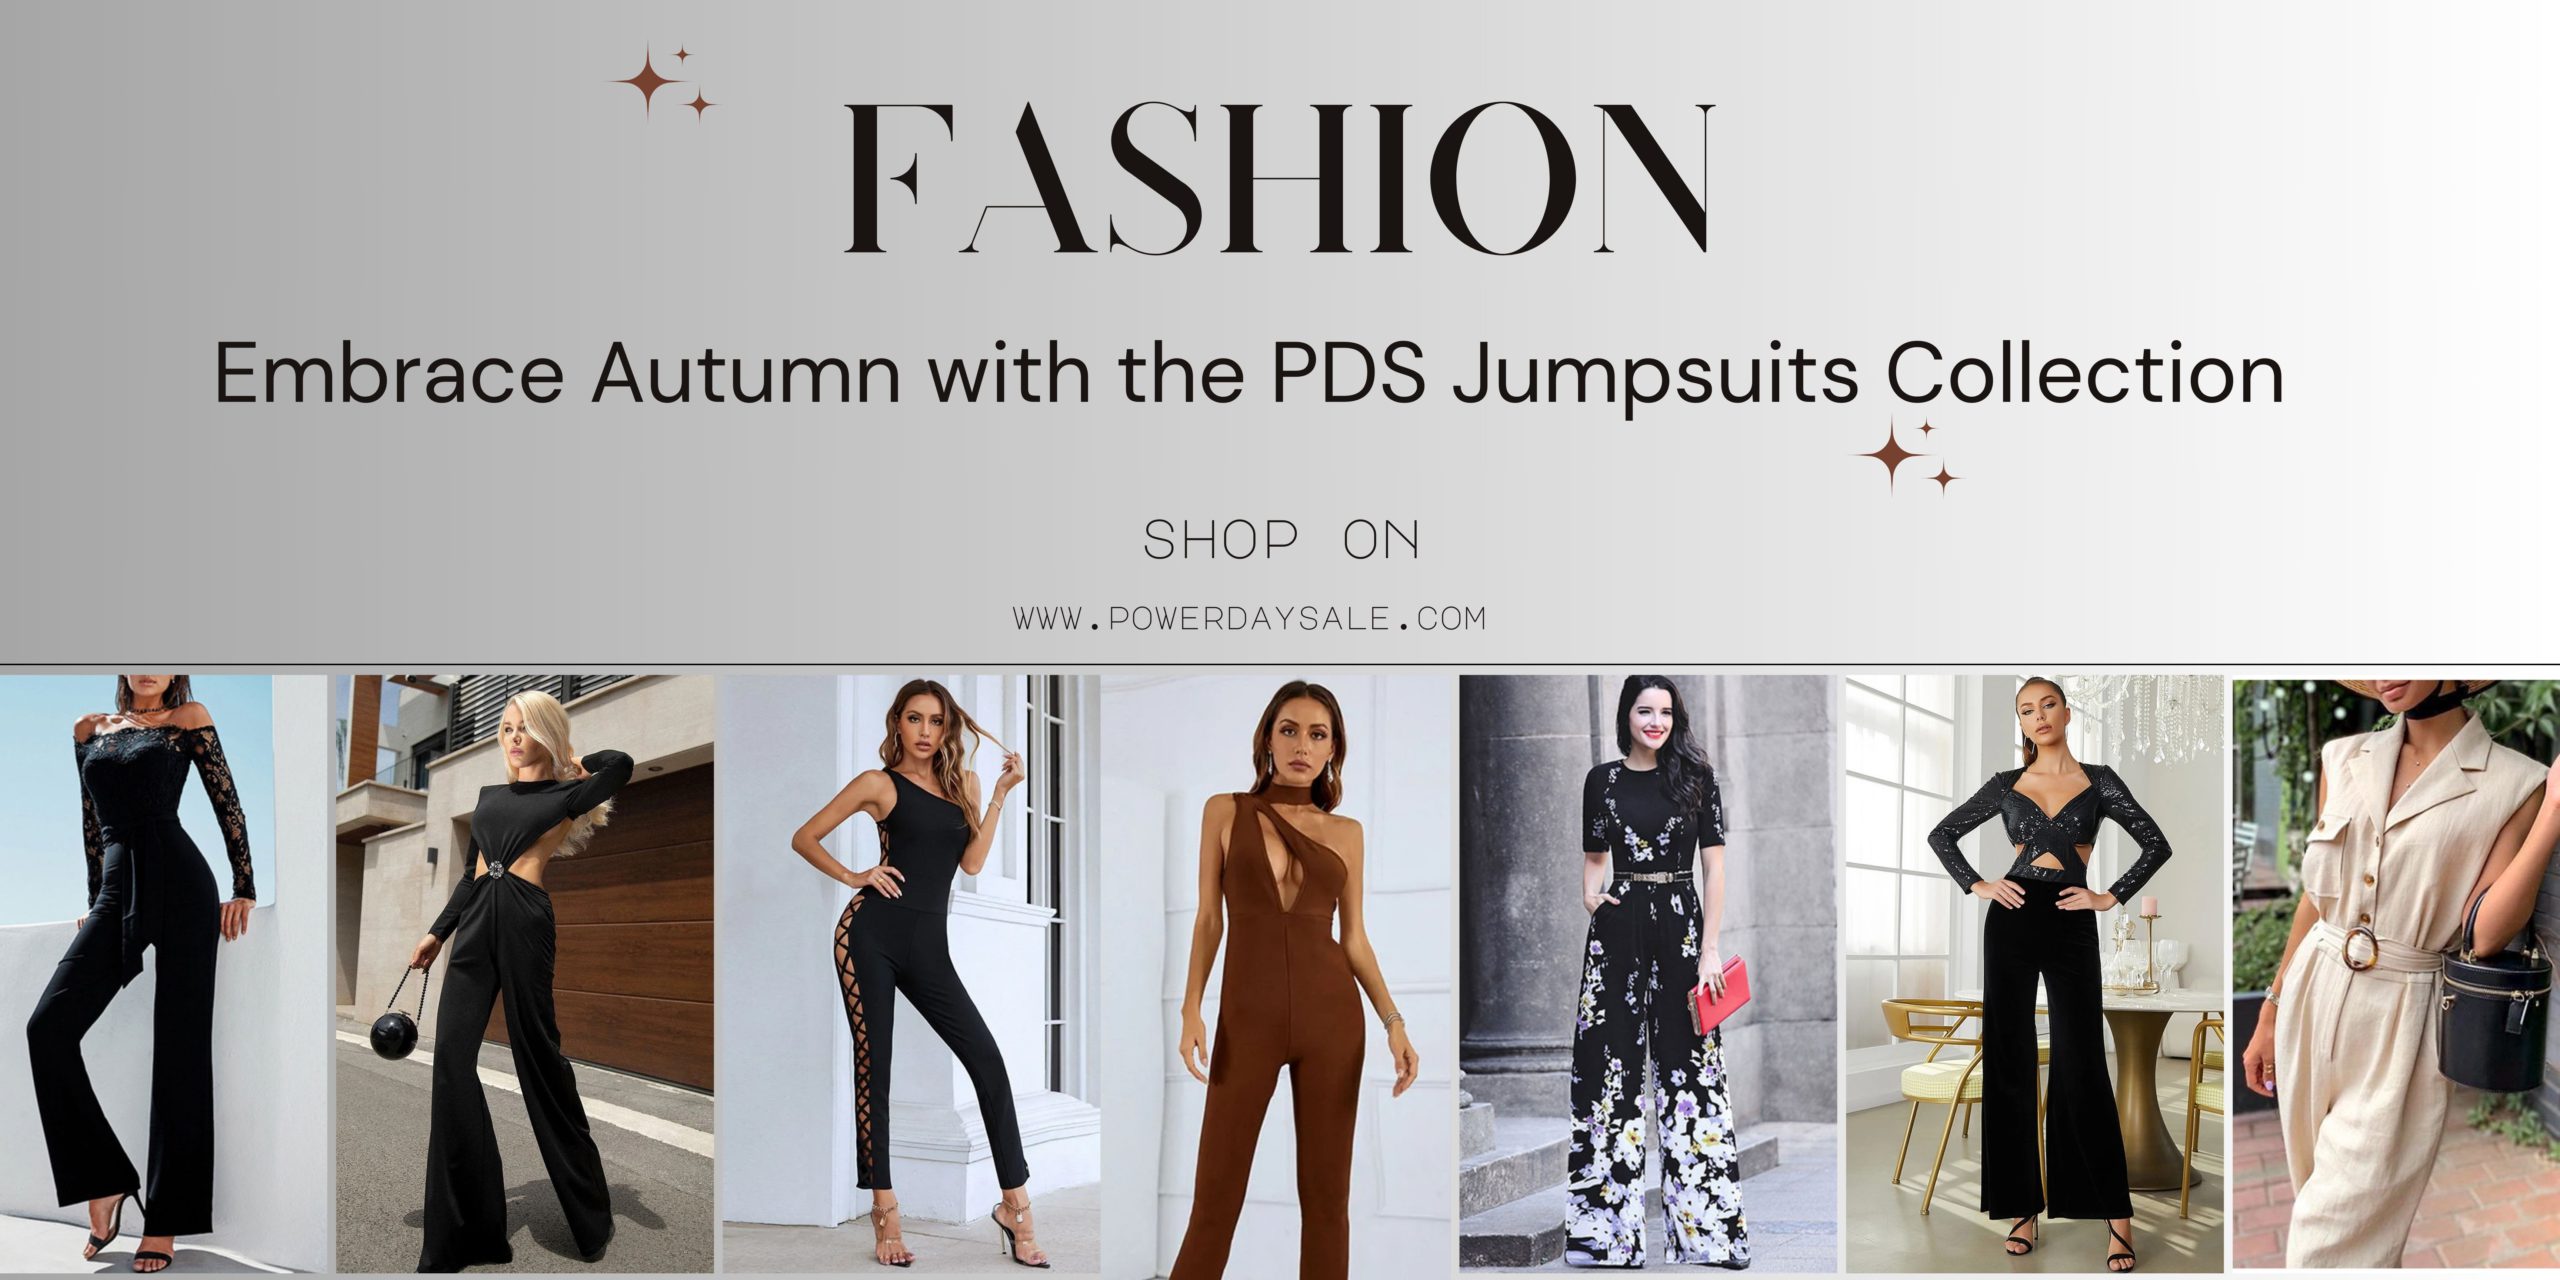 You are currently viewing Embrace Autumn with the PDS Jumpsuits Collection